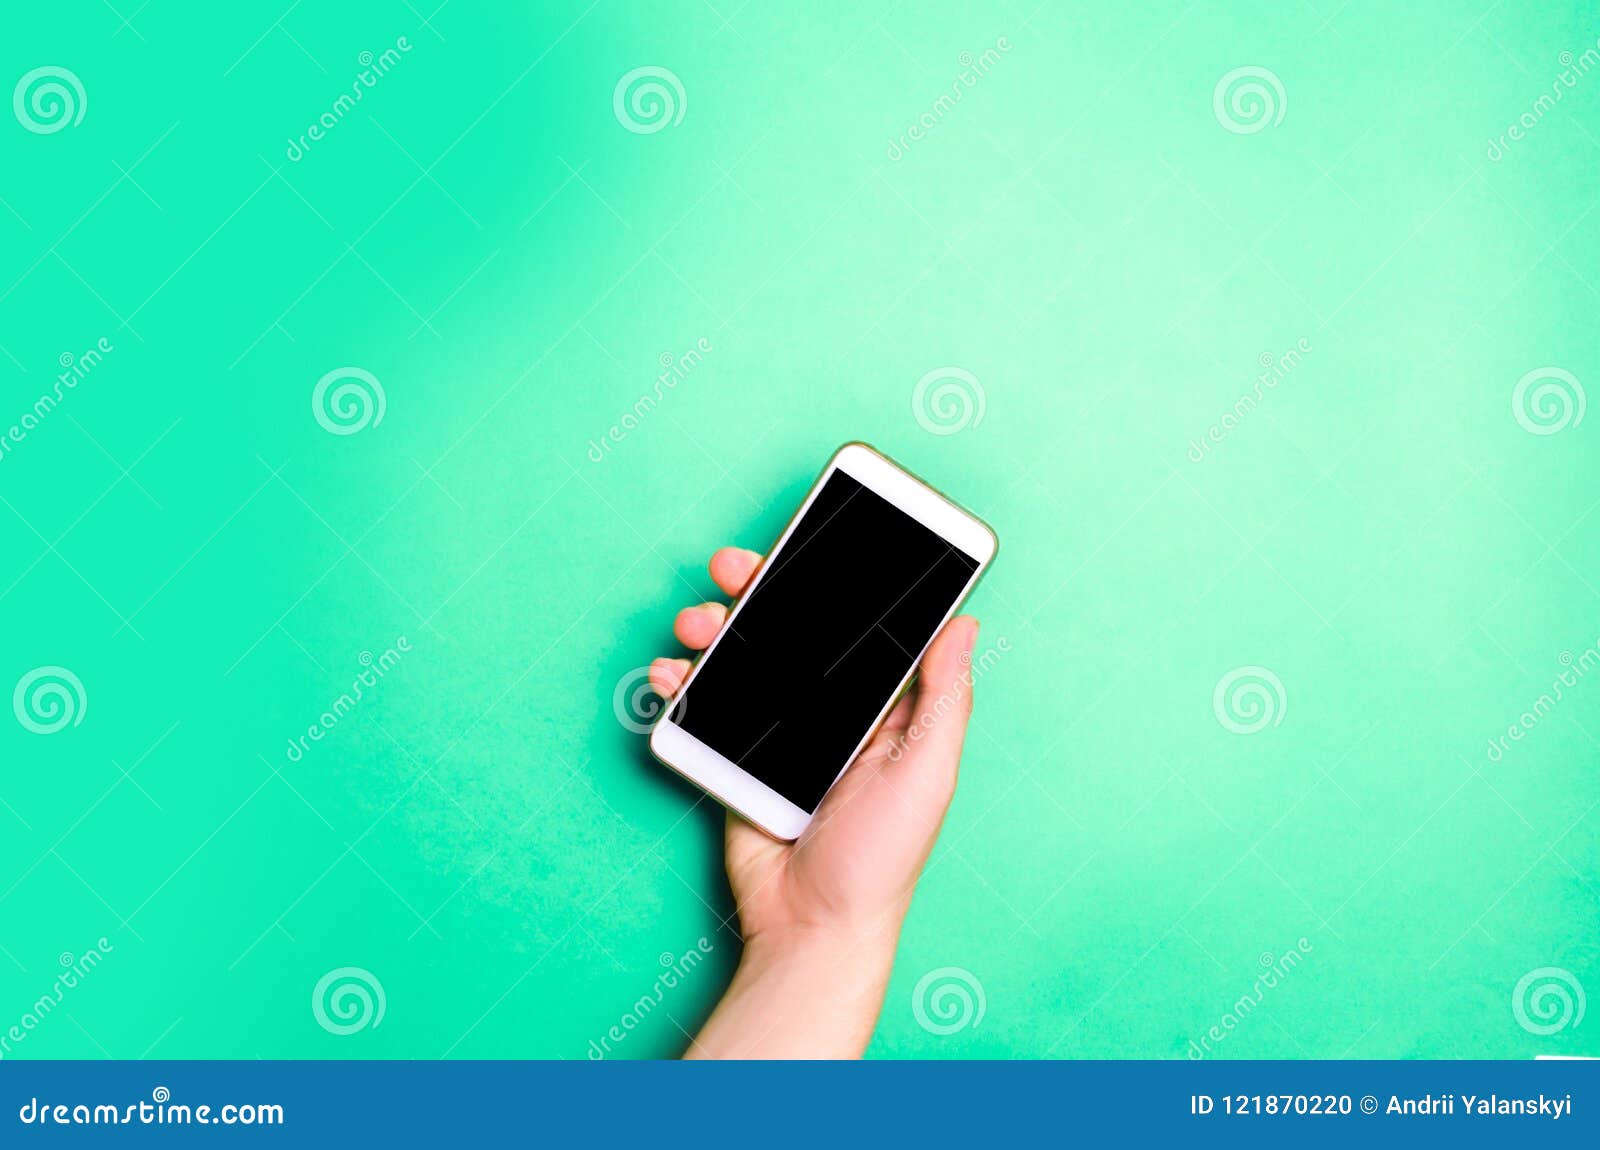 smartphone, phone in male hands on a green background. the concept of communication. use of gadgets, modern technologies. social n